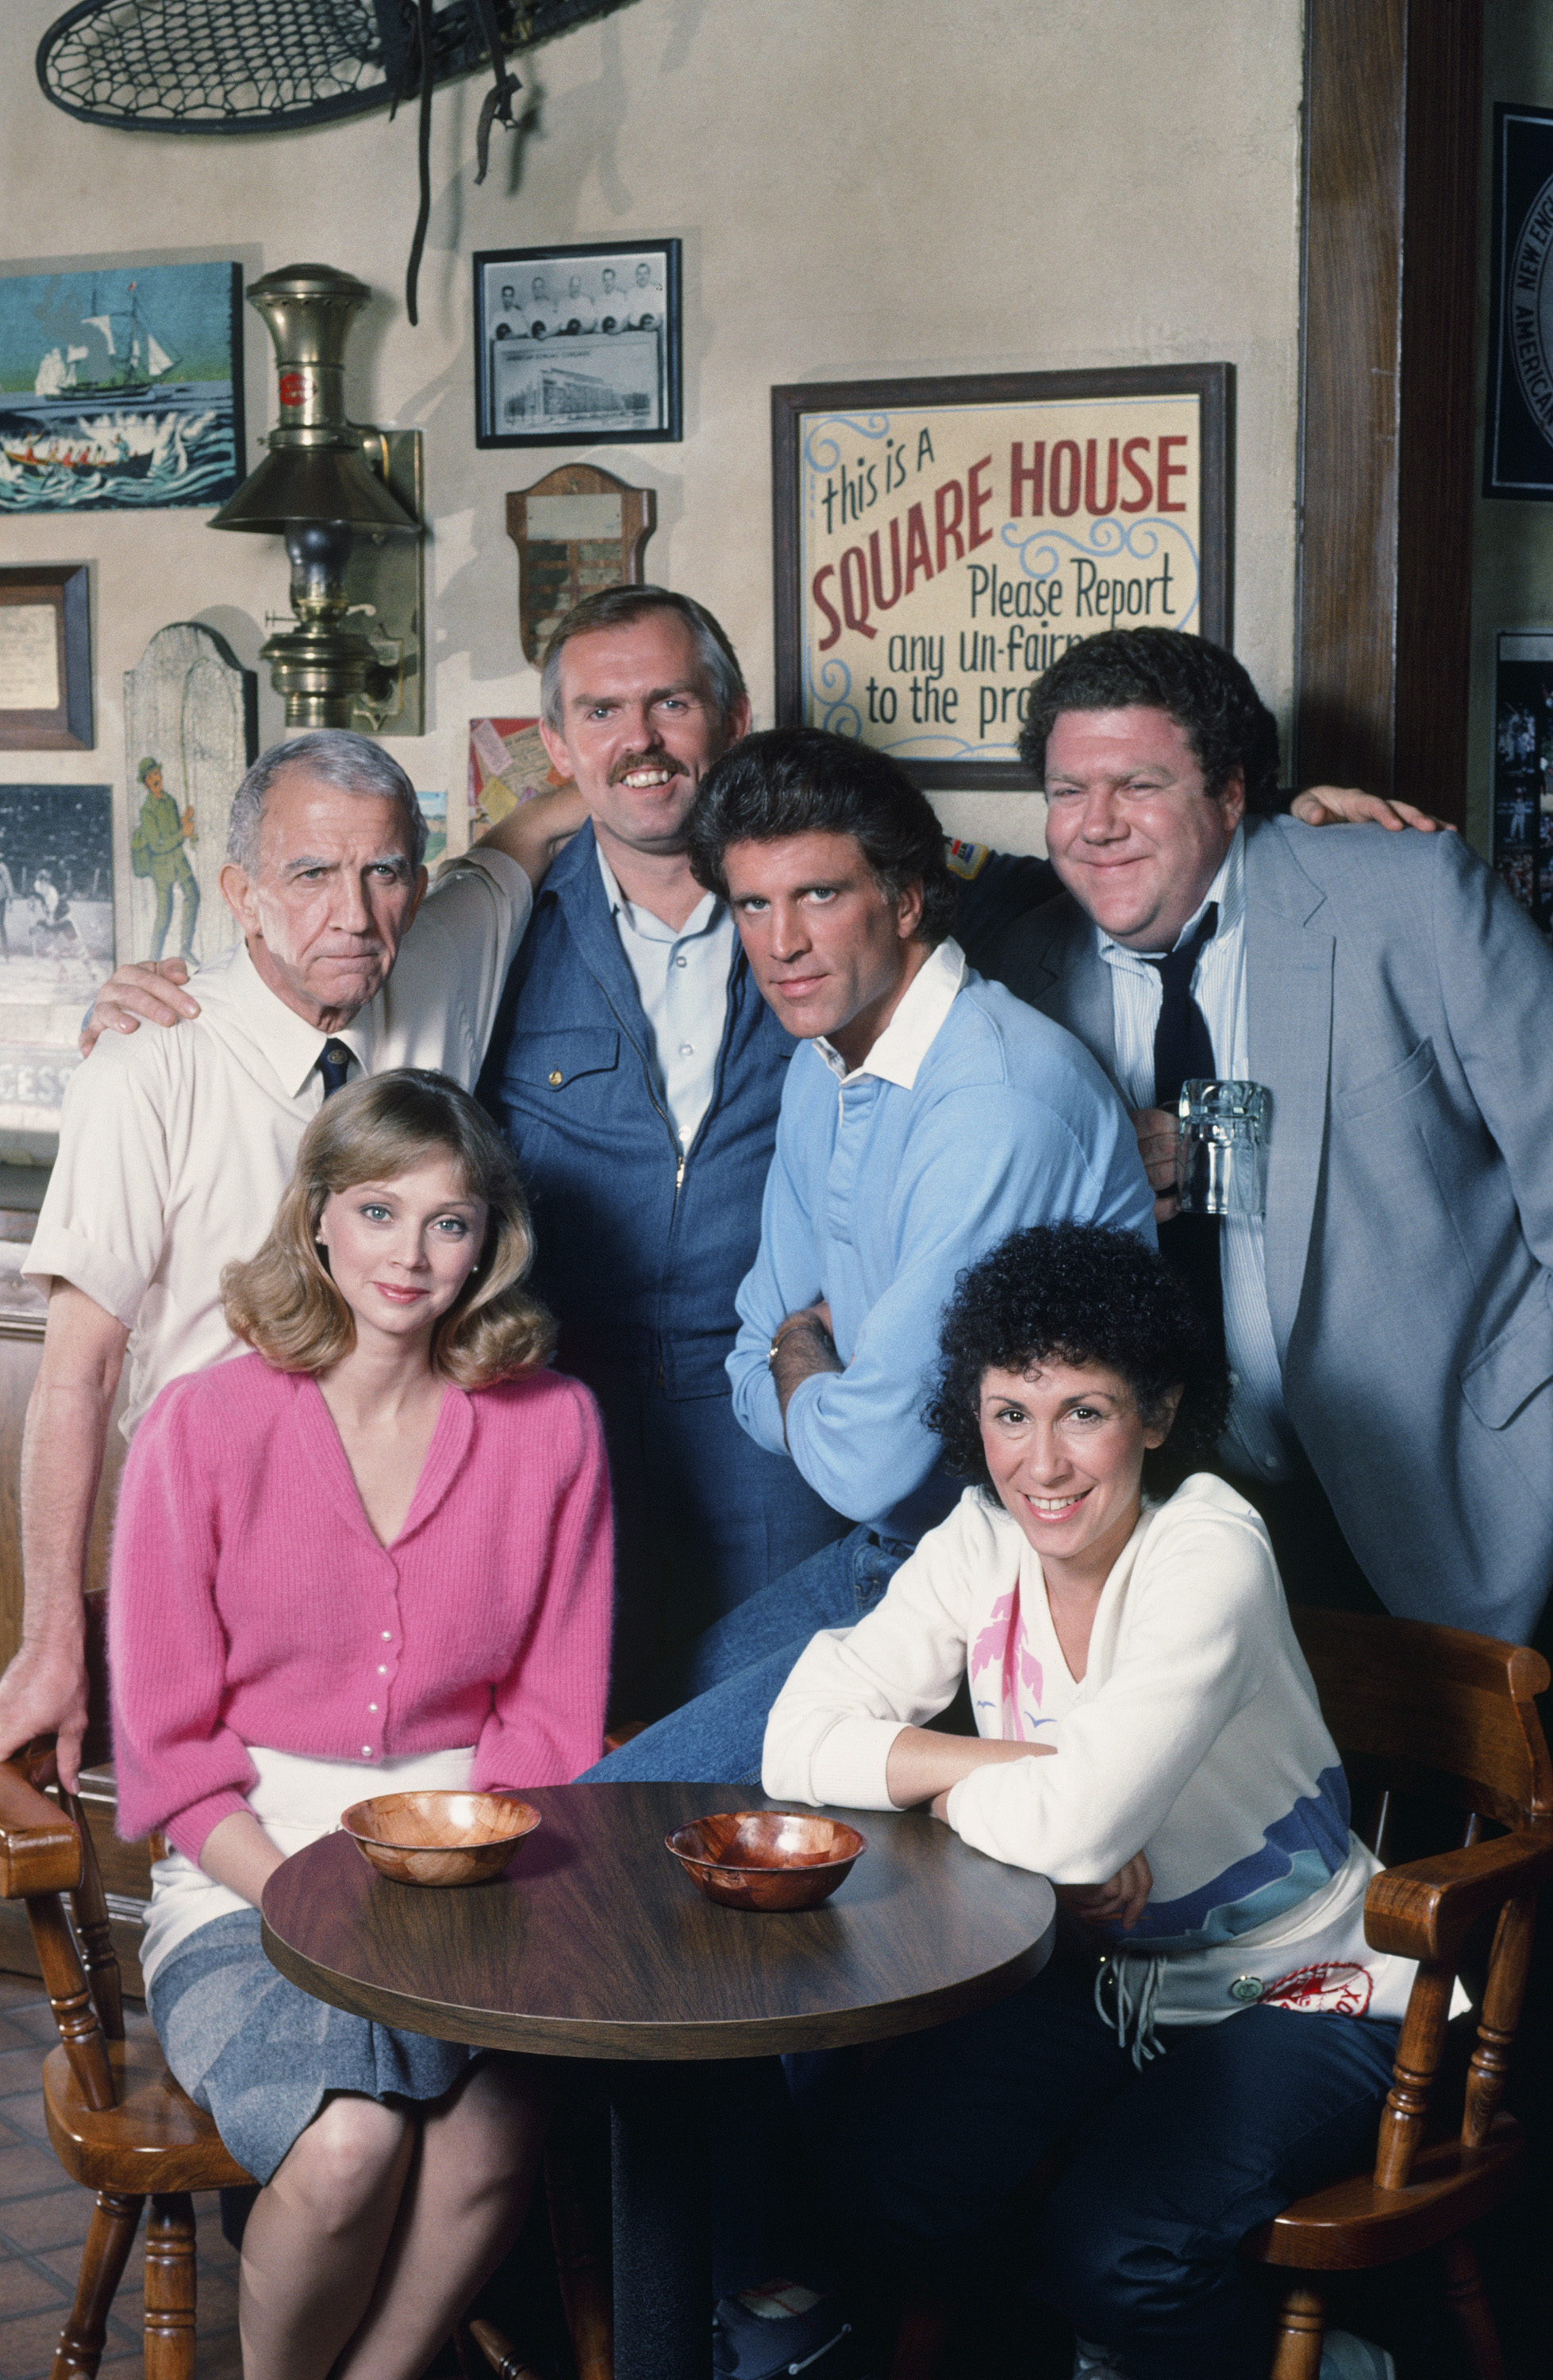 Still of Ted Danson, Shelley Long, John Ratzenberger, George Wendt and Nicholas Colasanto in Cheers (1982)